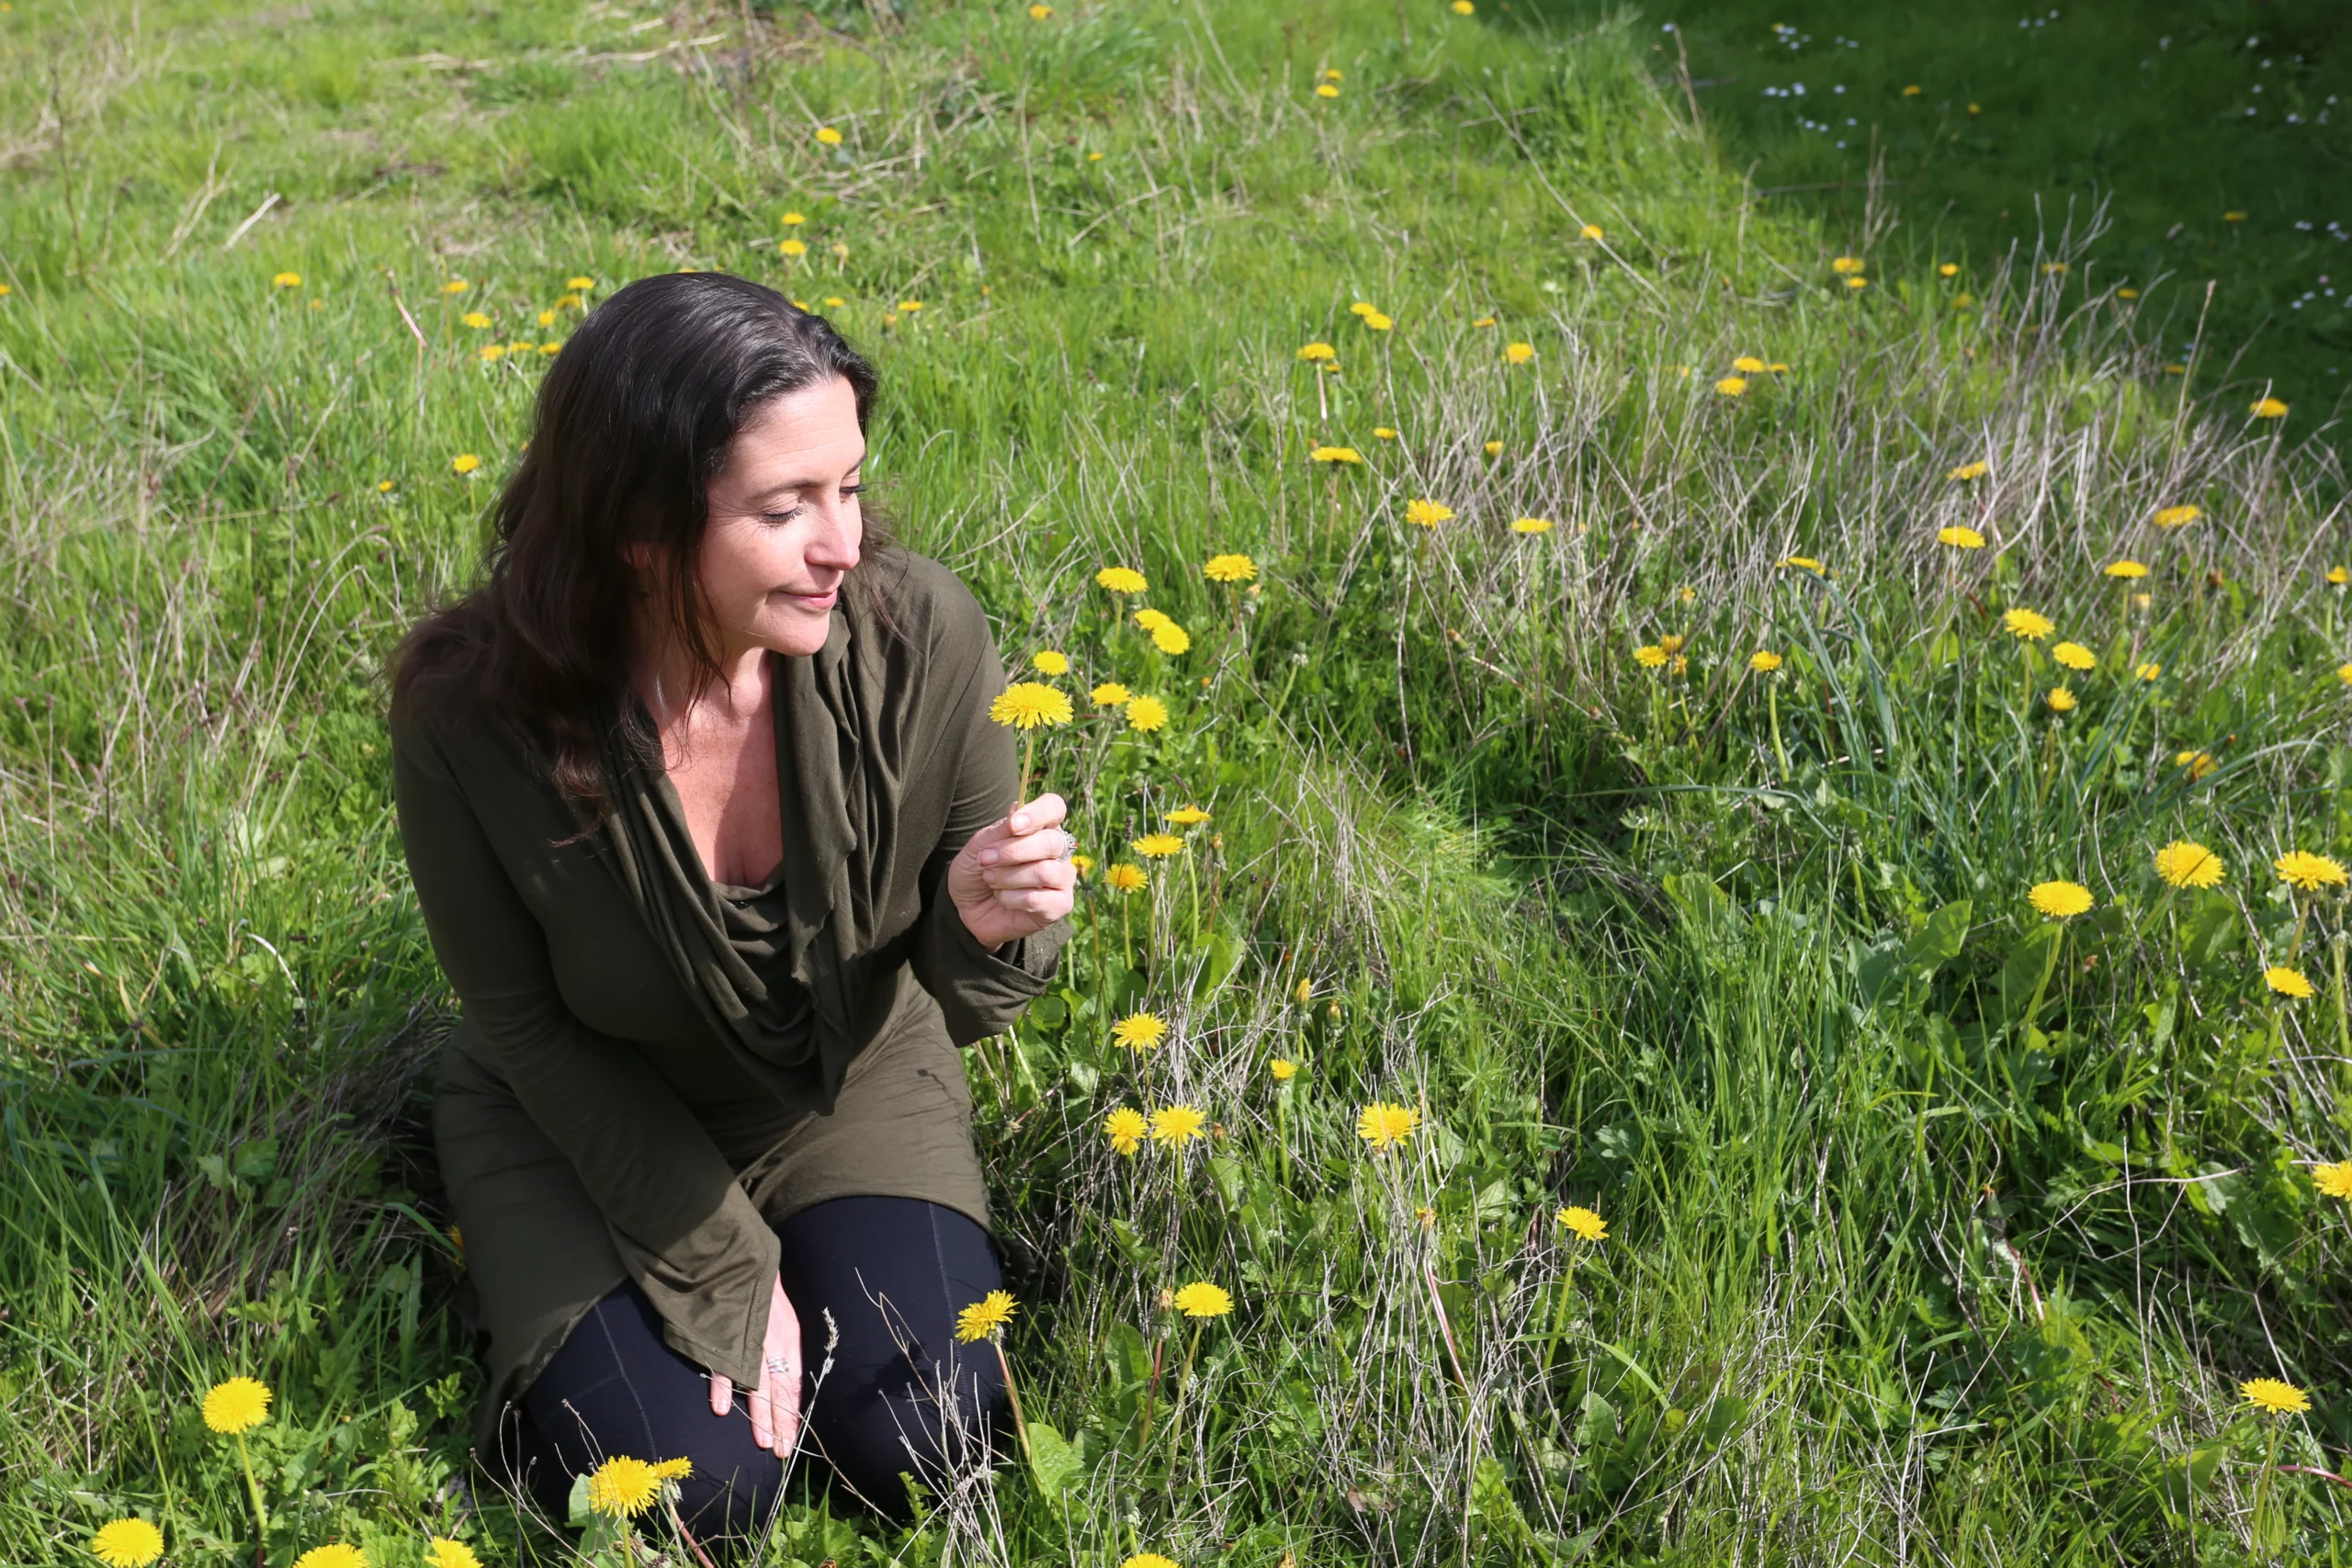 Woman kneeling in a field amongst yellow flowers holding one of them in her hand.